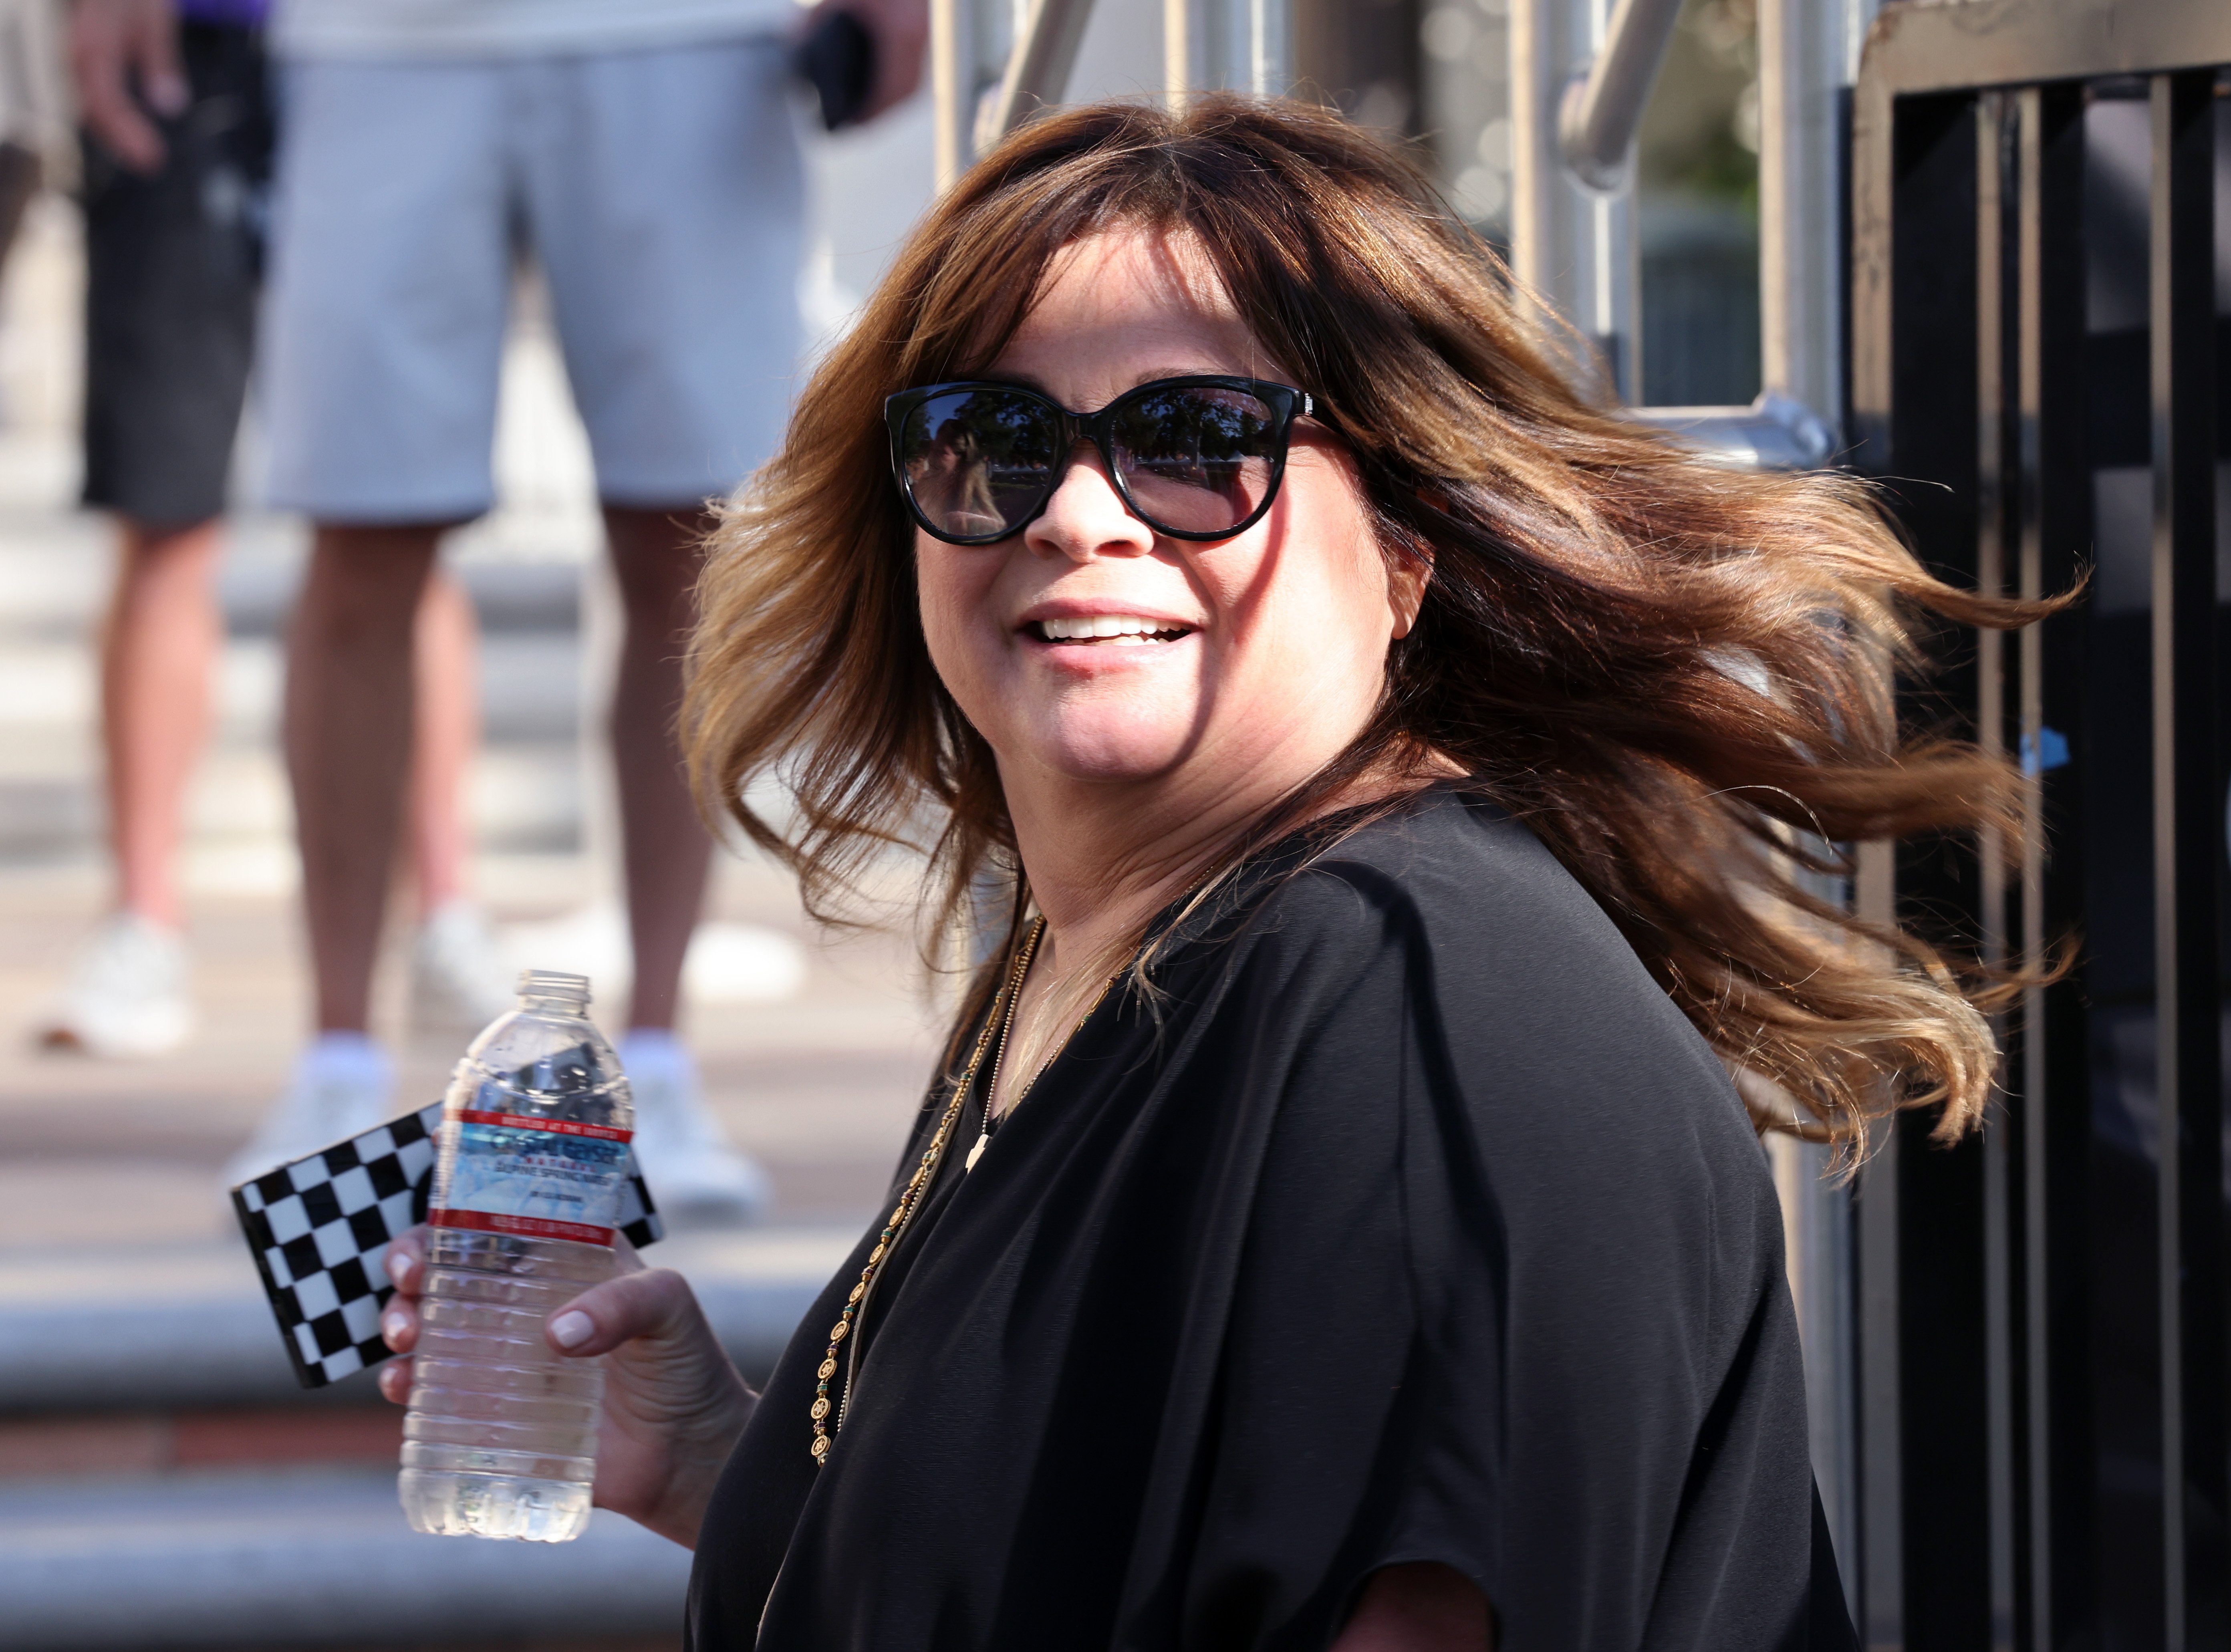 Valerie Bertinelli attends the Los Angeles Times Festival of Books at the University of Southern California on April 23, 2022 in Los Angeles, California. | Source: Getty Images